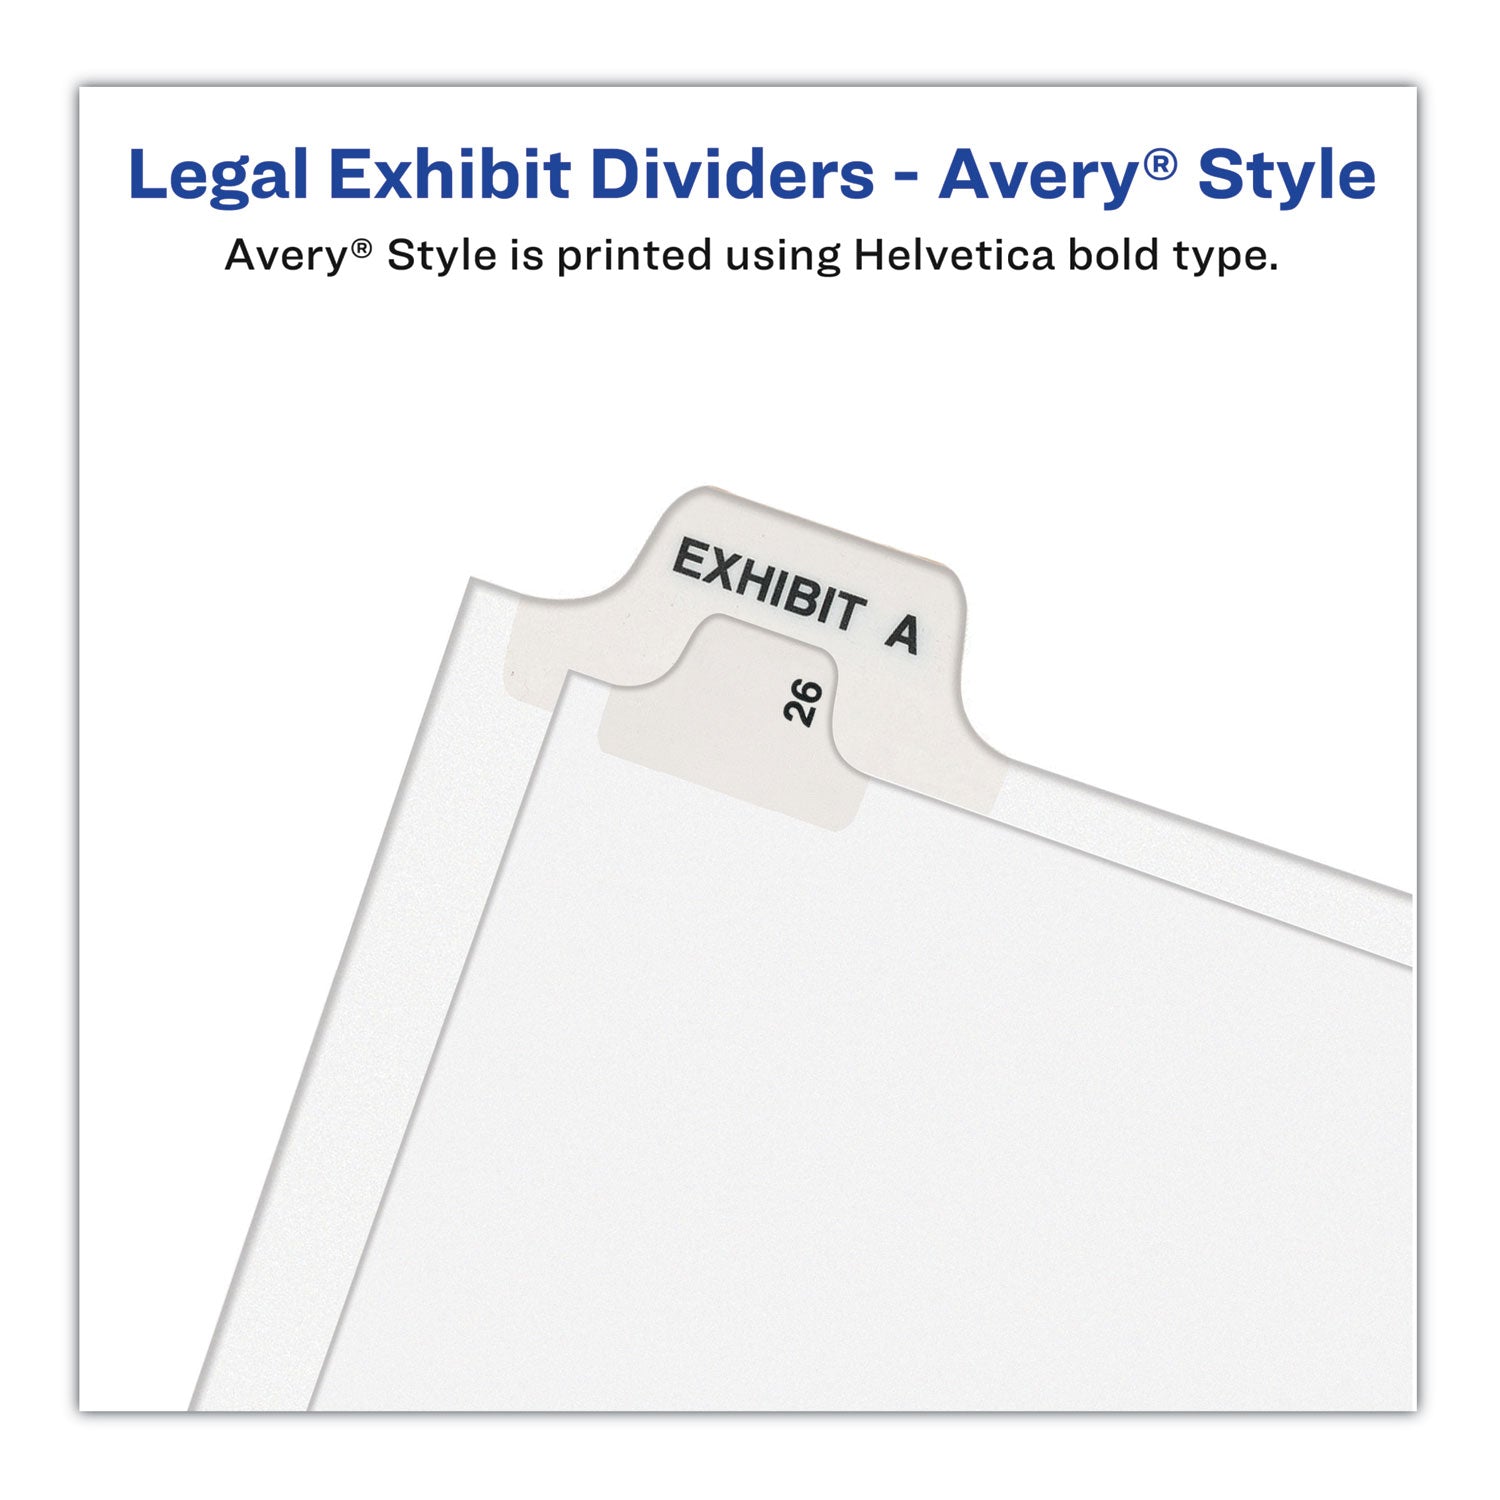 Preprinted Legal Exhibit Side Tab Index Dividers, Avery Style, 25-Tab, 201 to 225, 11 x 8.5, White, 1 Set, (1338) - 